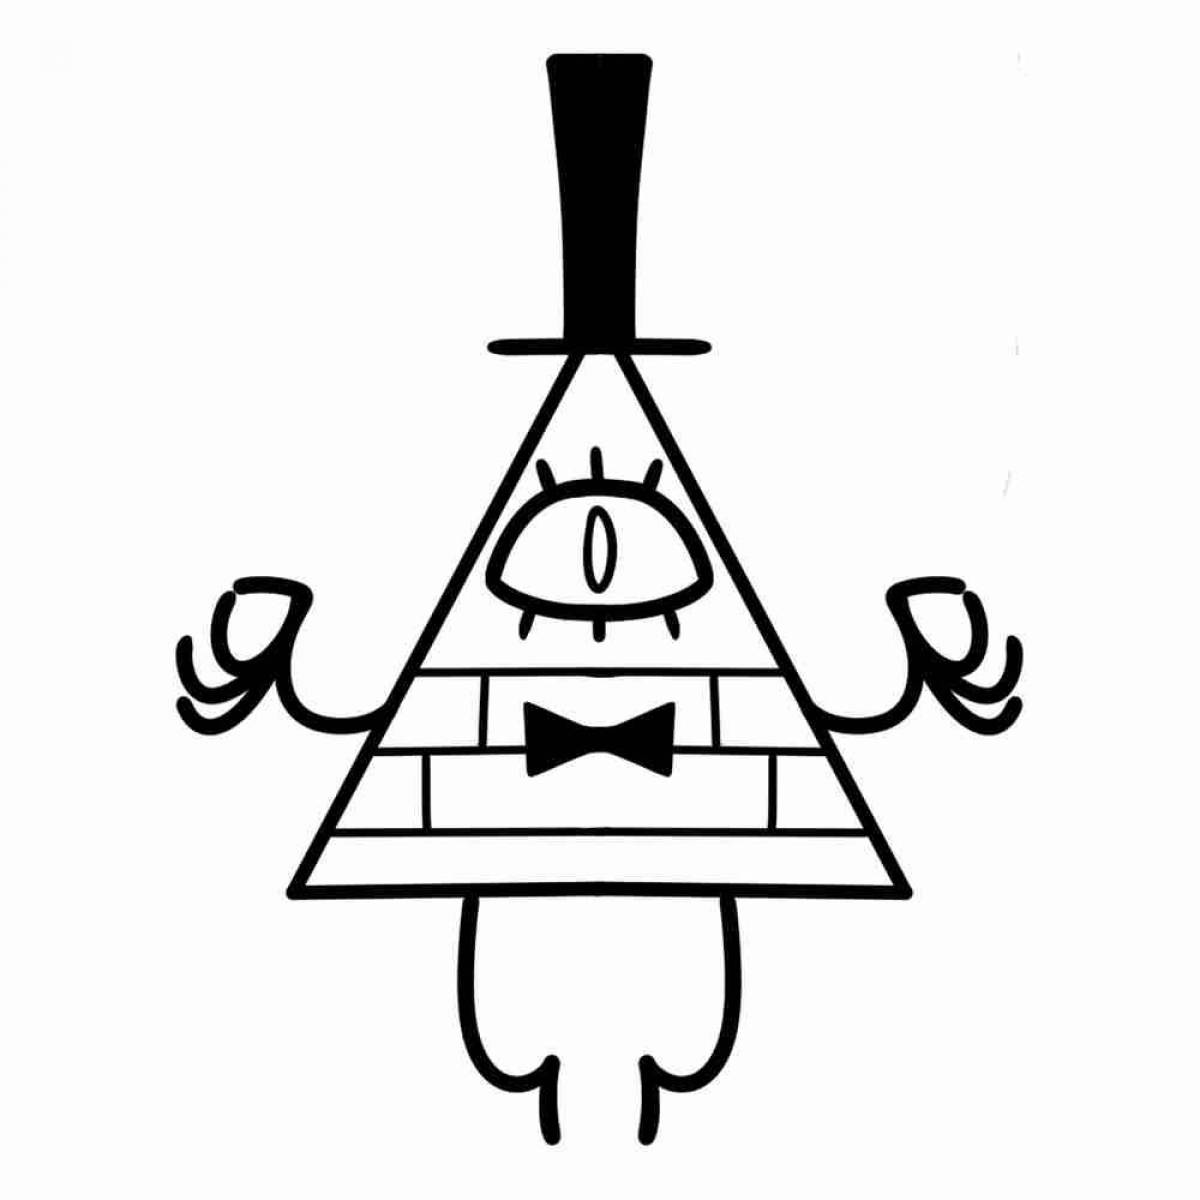 Charming bill cipher coloring book